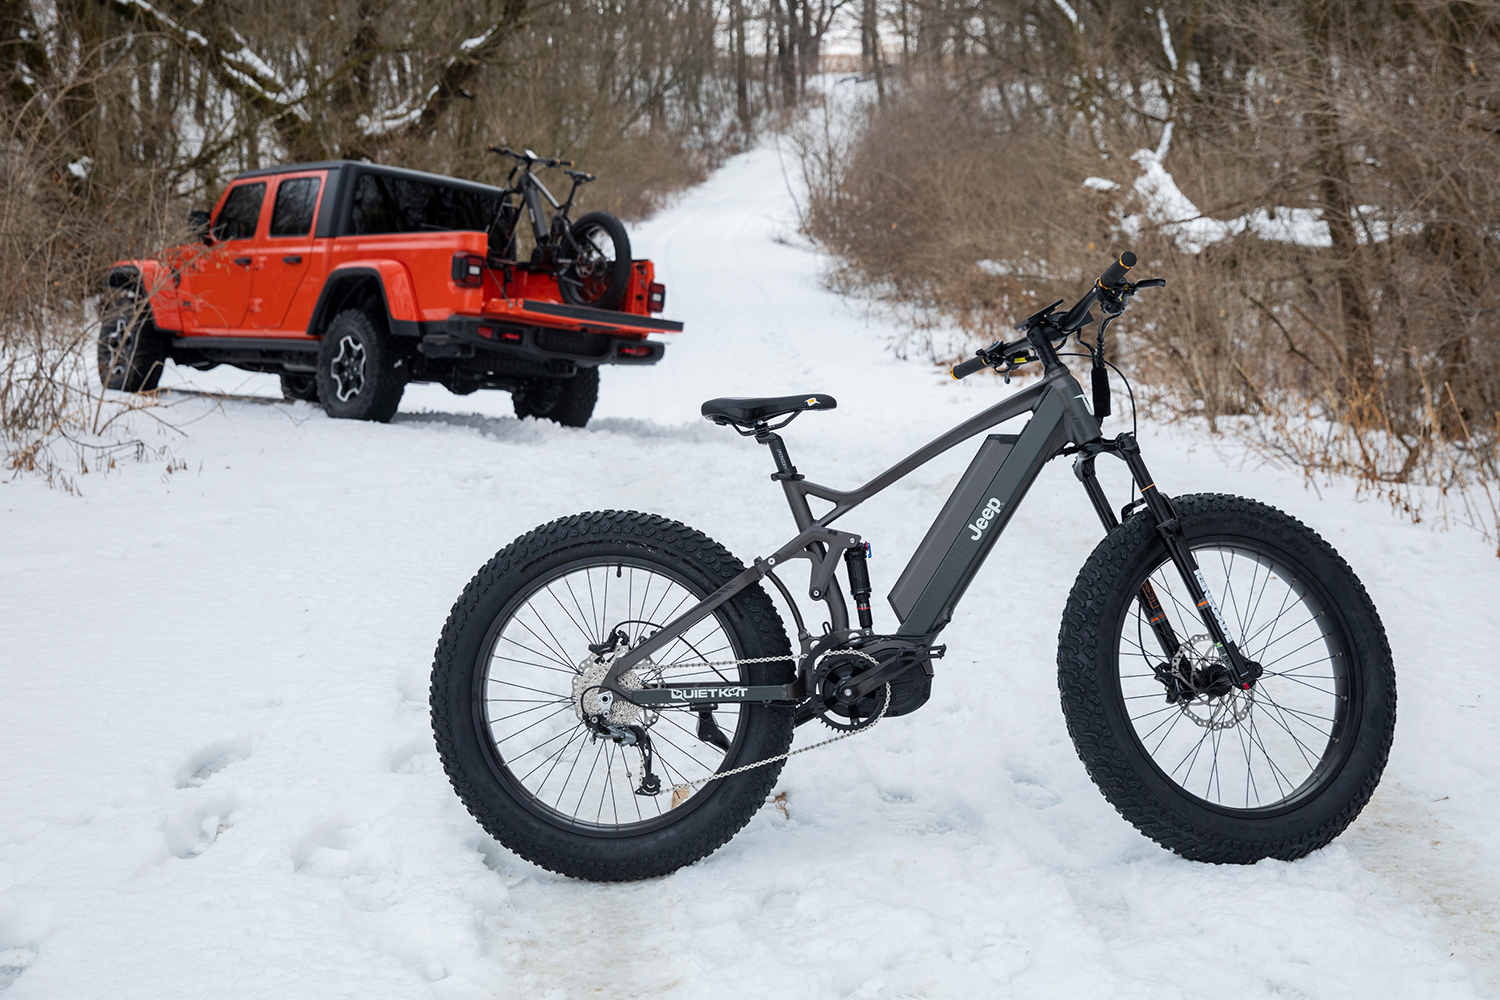 A Jeep e-bike sitting in the snow with an orange Gladiator pickup truck in the background